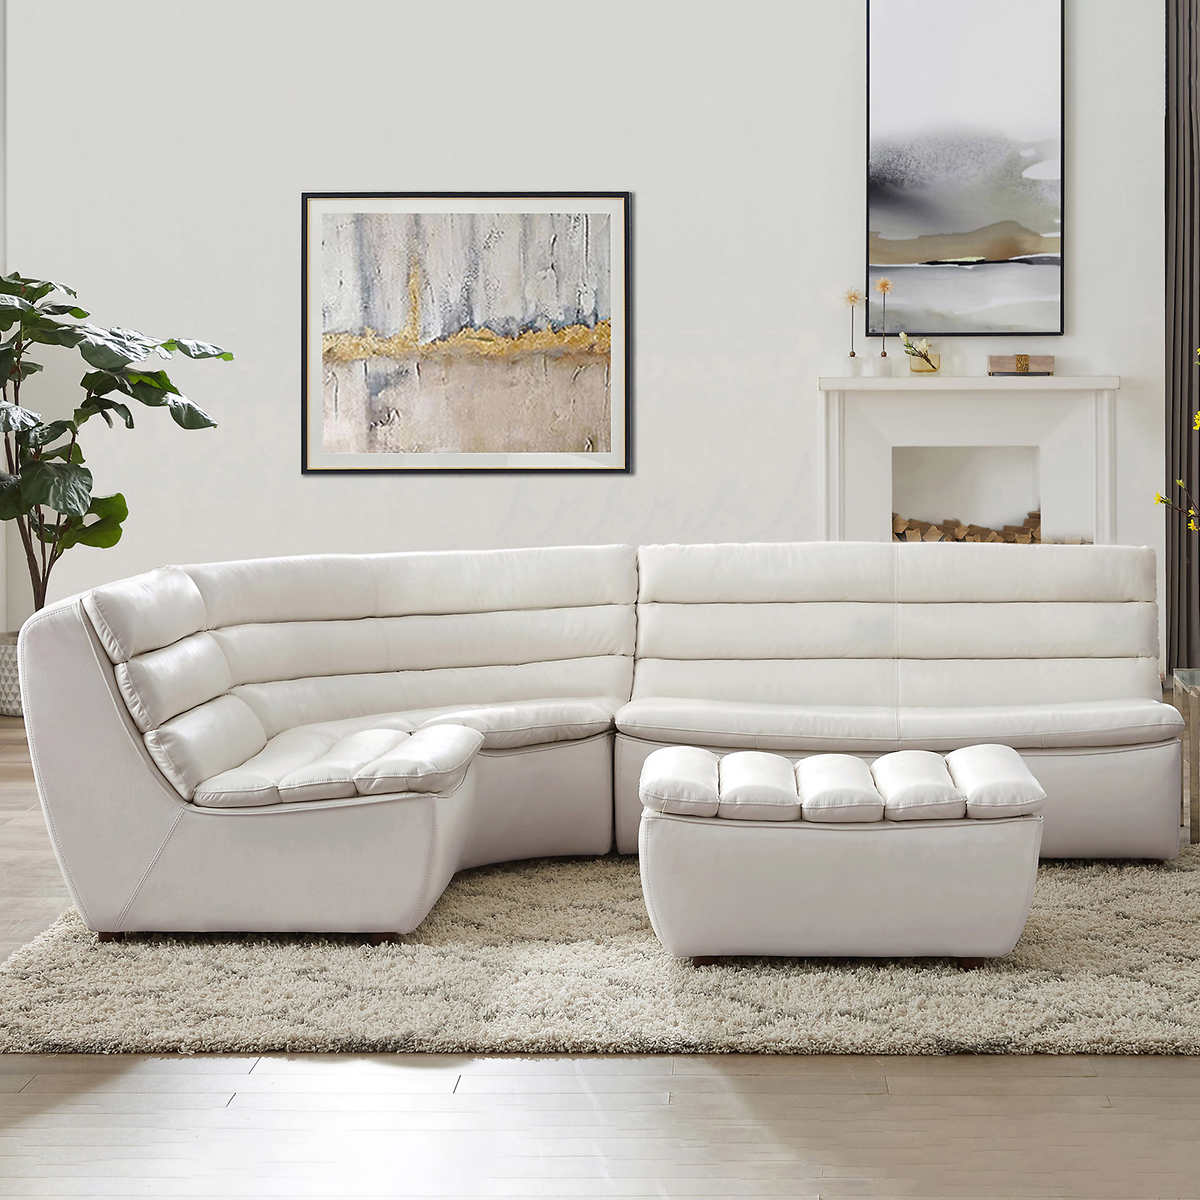 Auburn Leather Sectional Ottoman Costco, What Does Sofas Mean In Nutrition